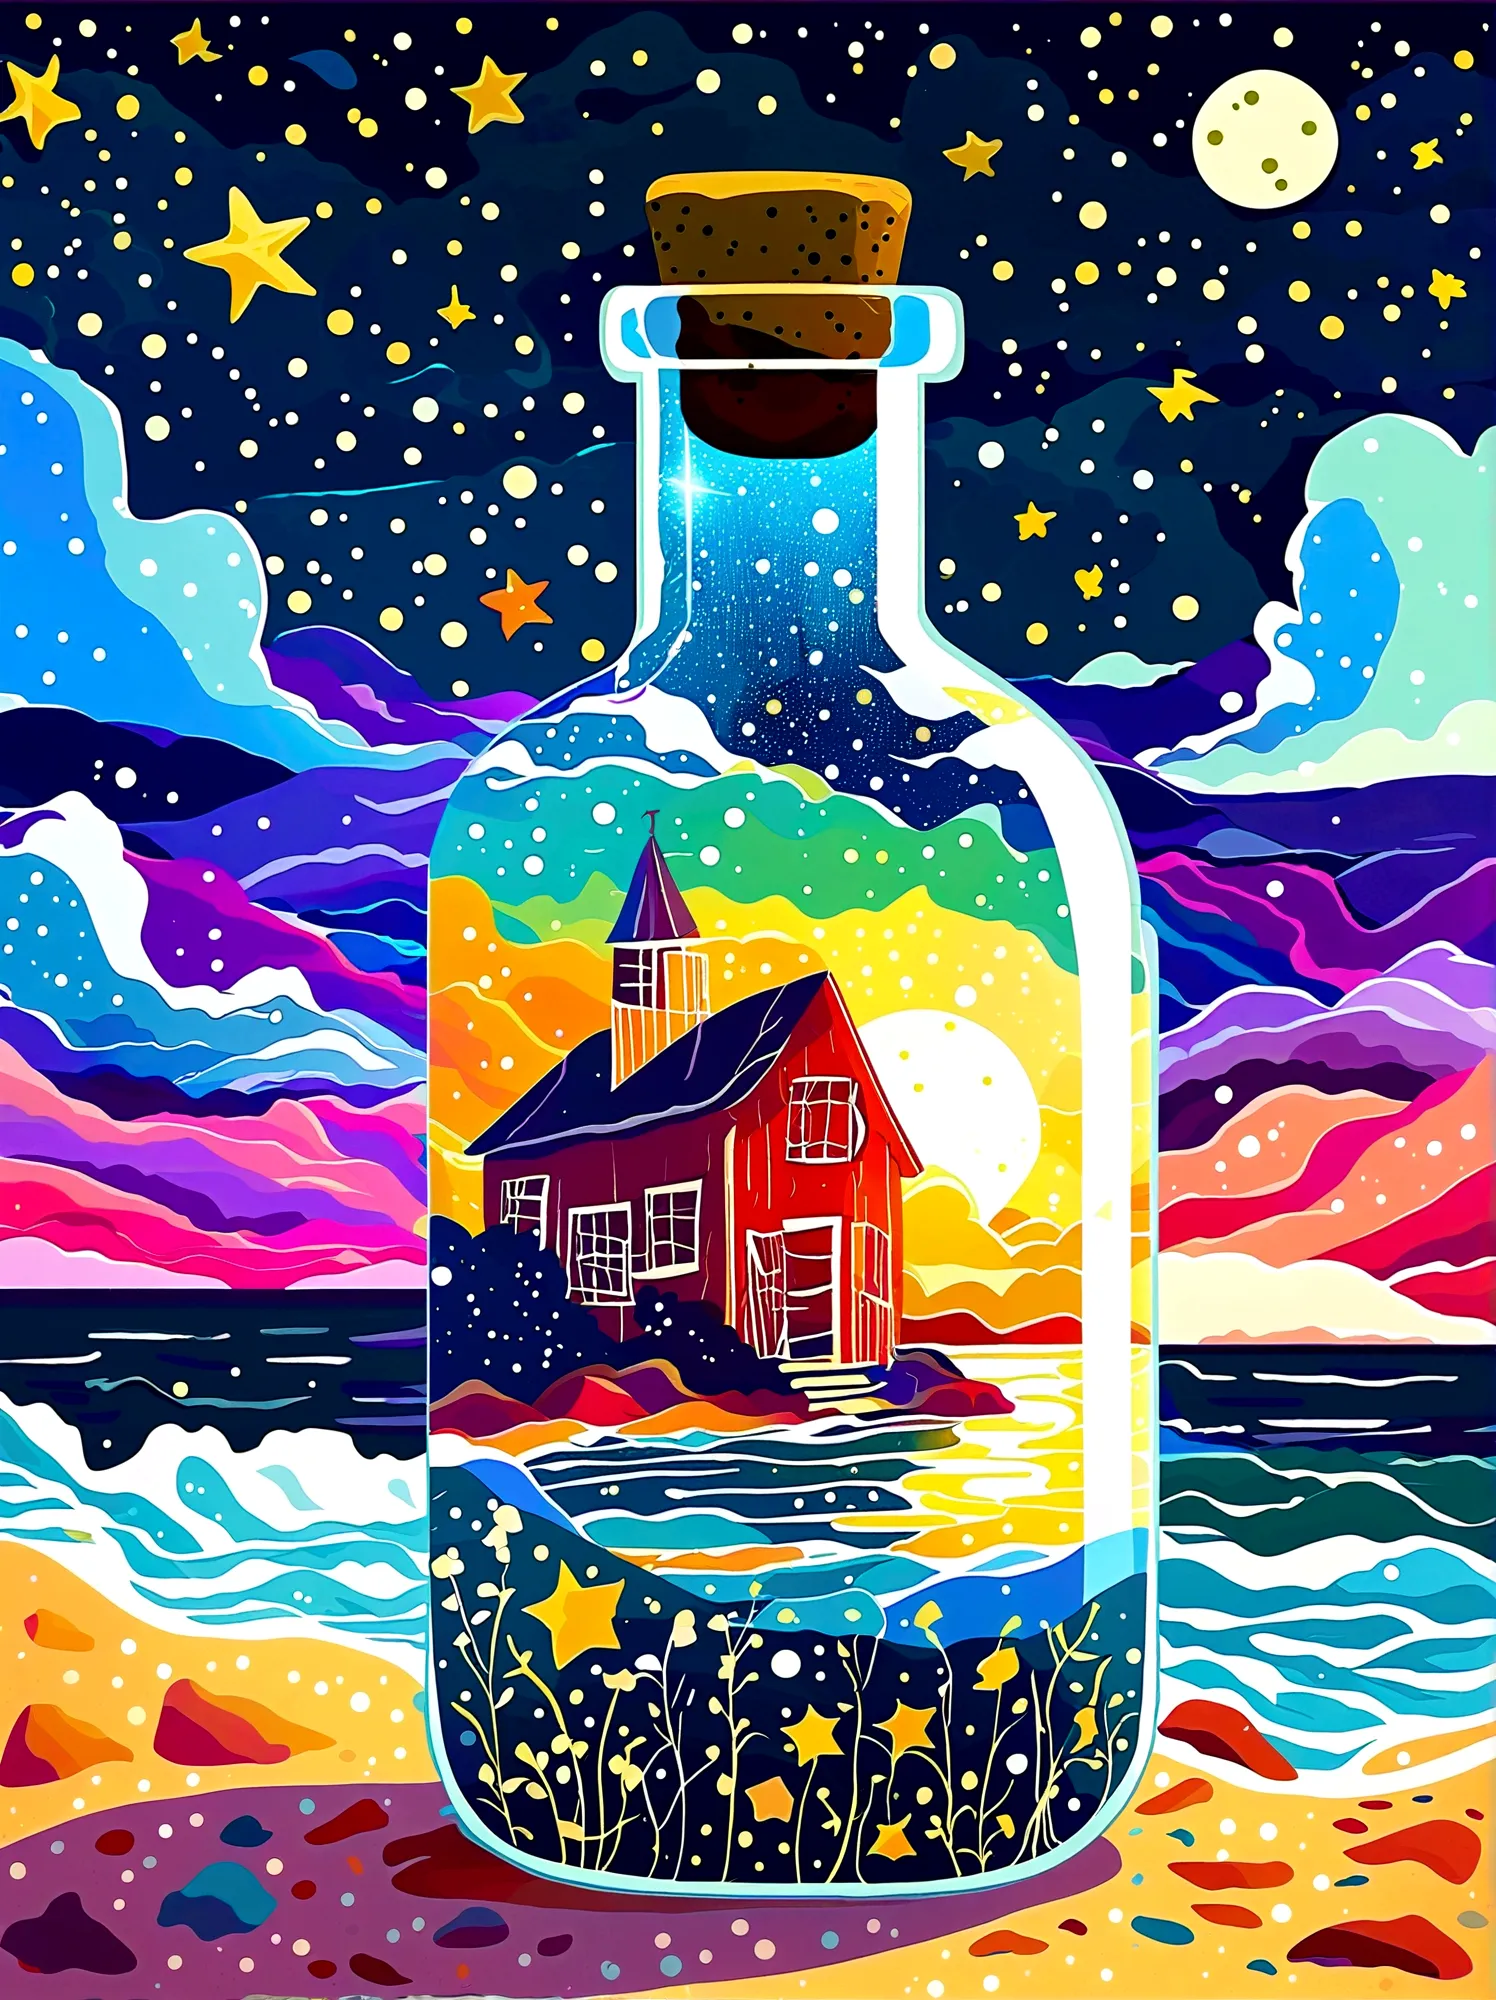 Starry sky Van Gogh painting trapped inside a hourglass bottle. Color and starry skies spilling out of the bottle and pooling on...